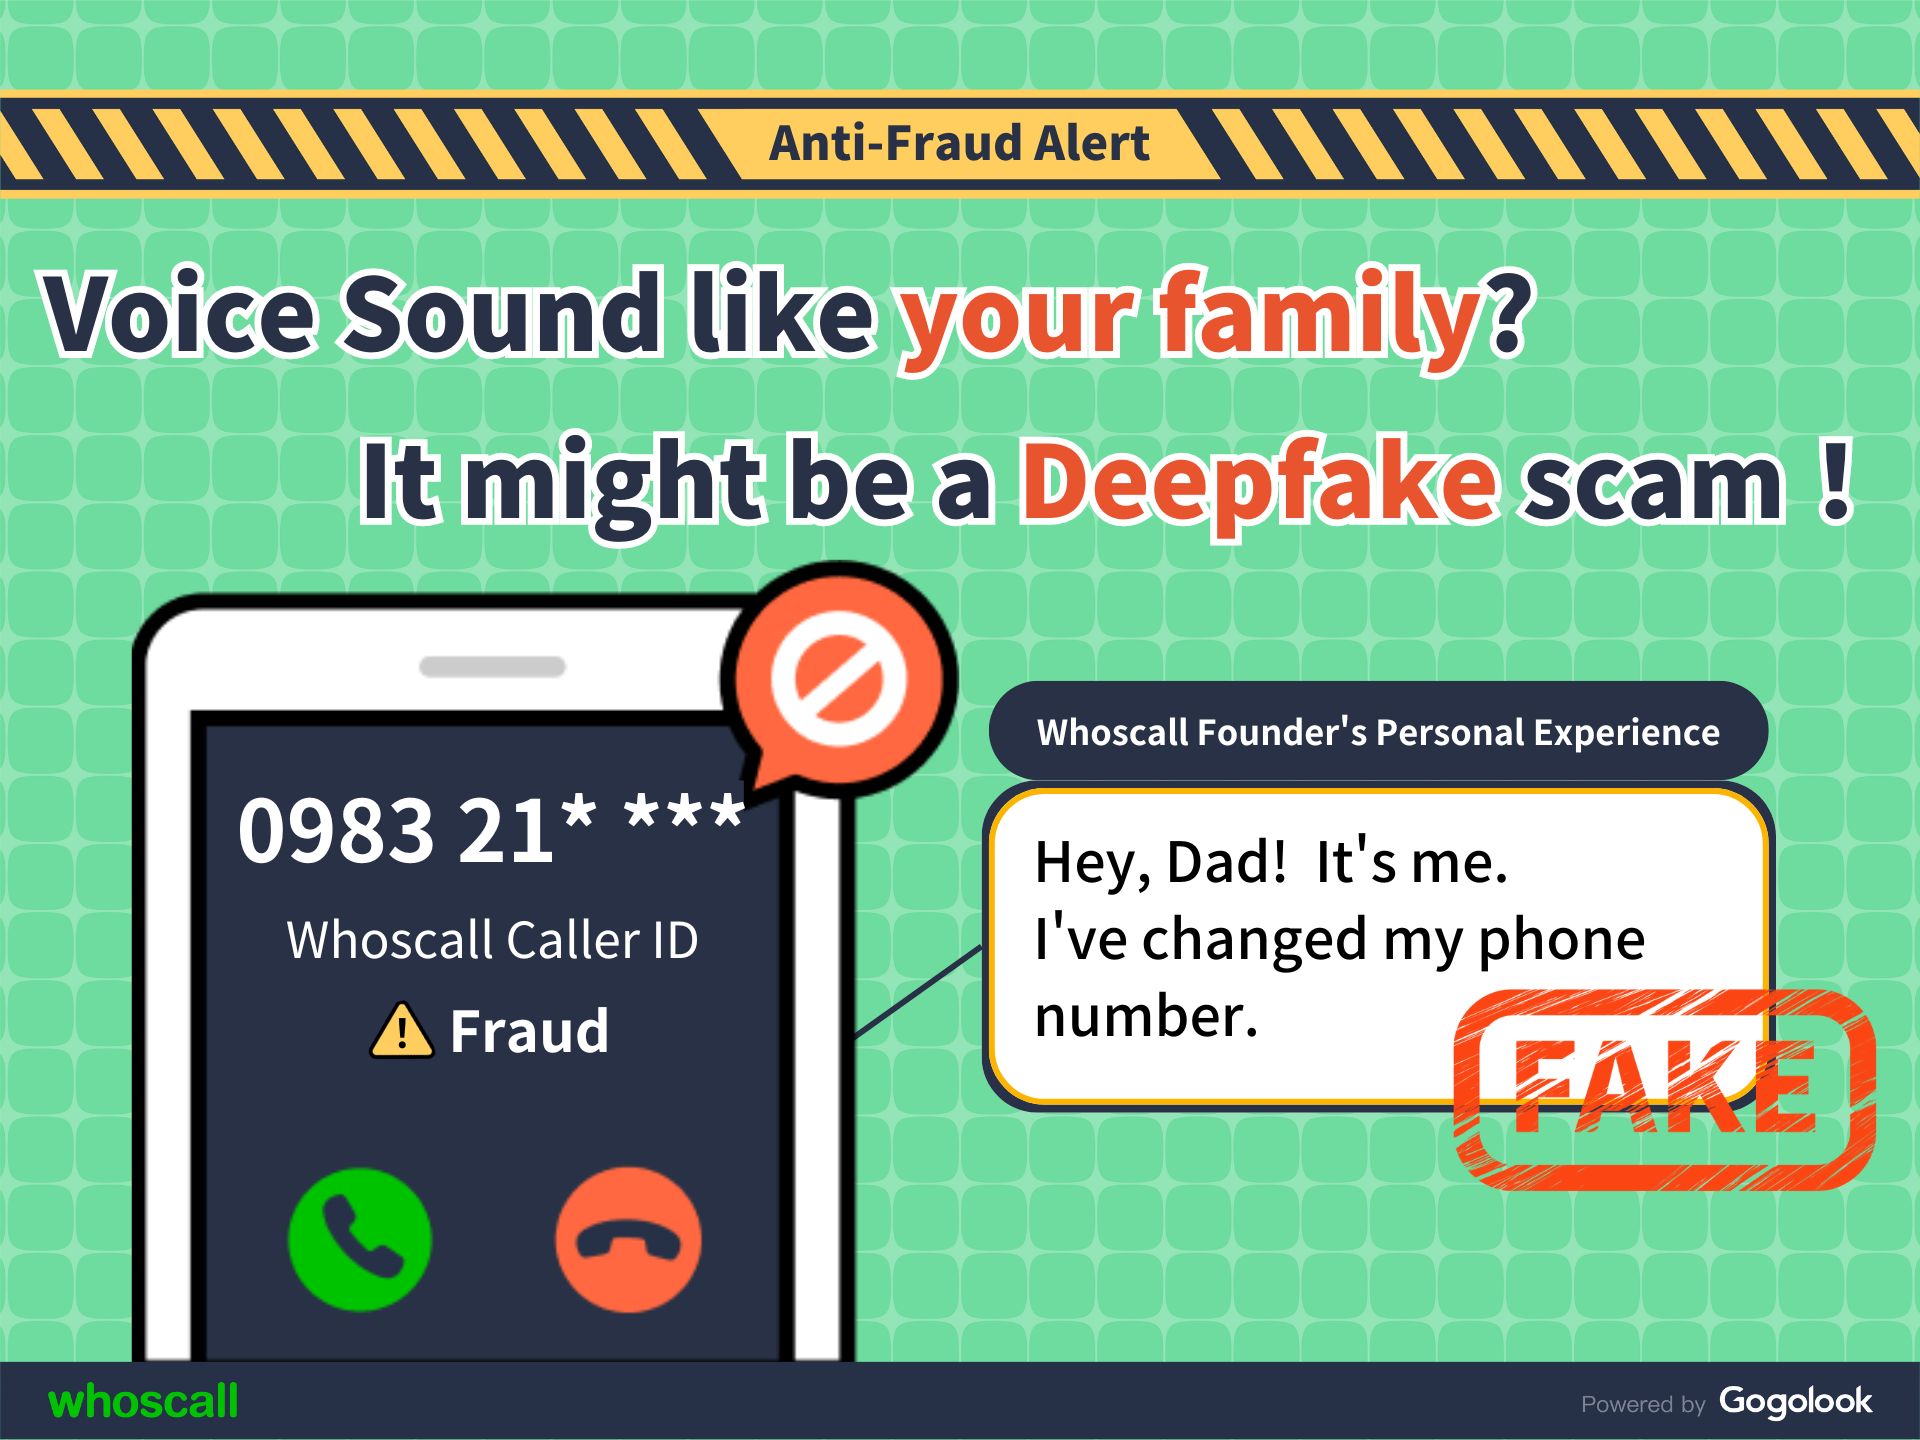 Deepfake Scam Calls Are Targeting Your Family. Beware of Scammers Impersonating Your Voice! 